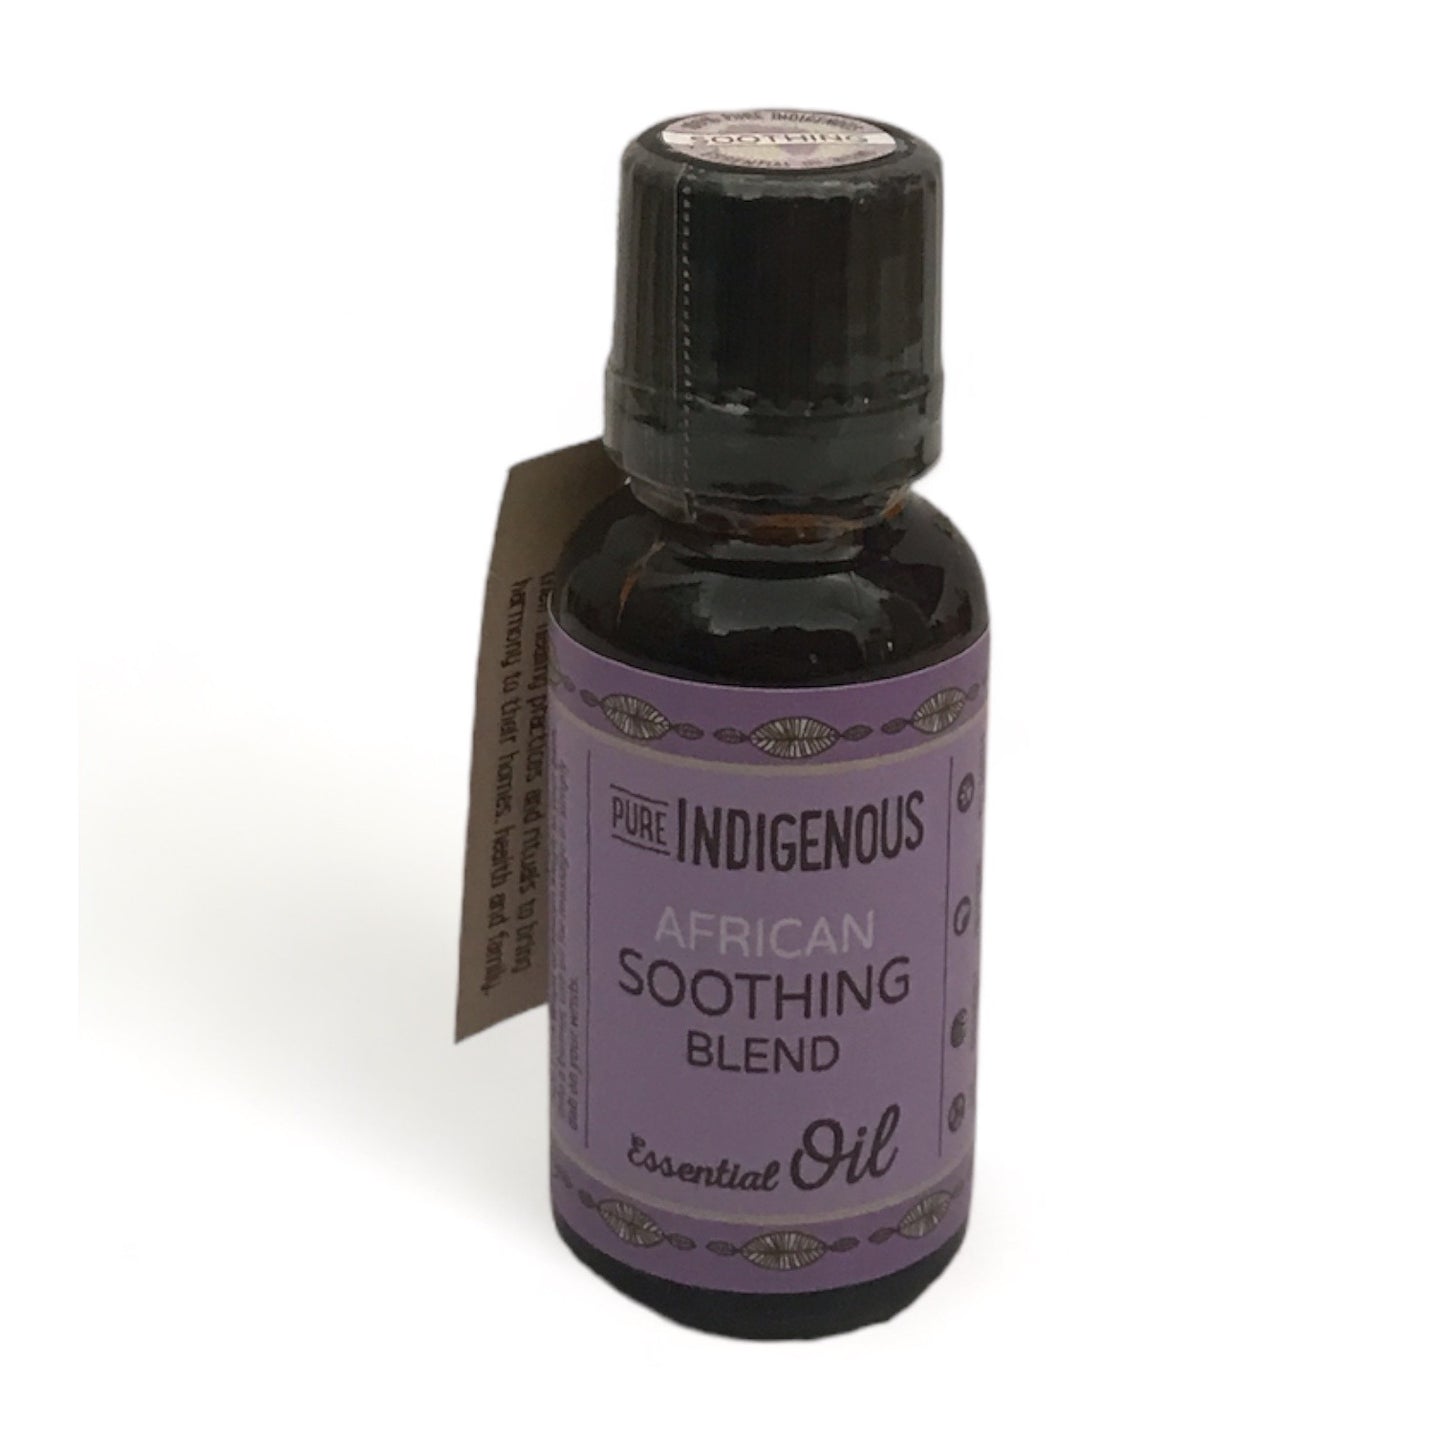 African Soothing Blend Essential Oil - Pure Indigenous